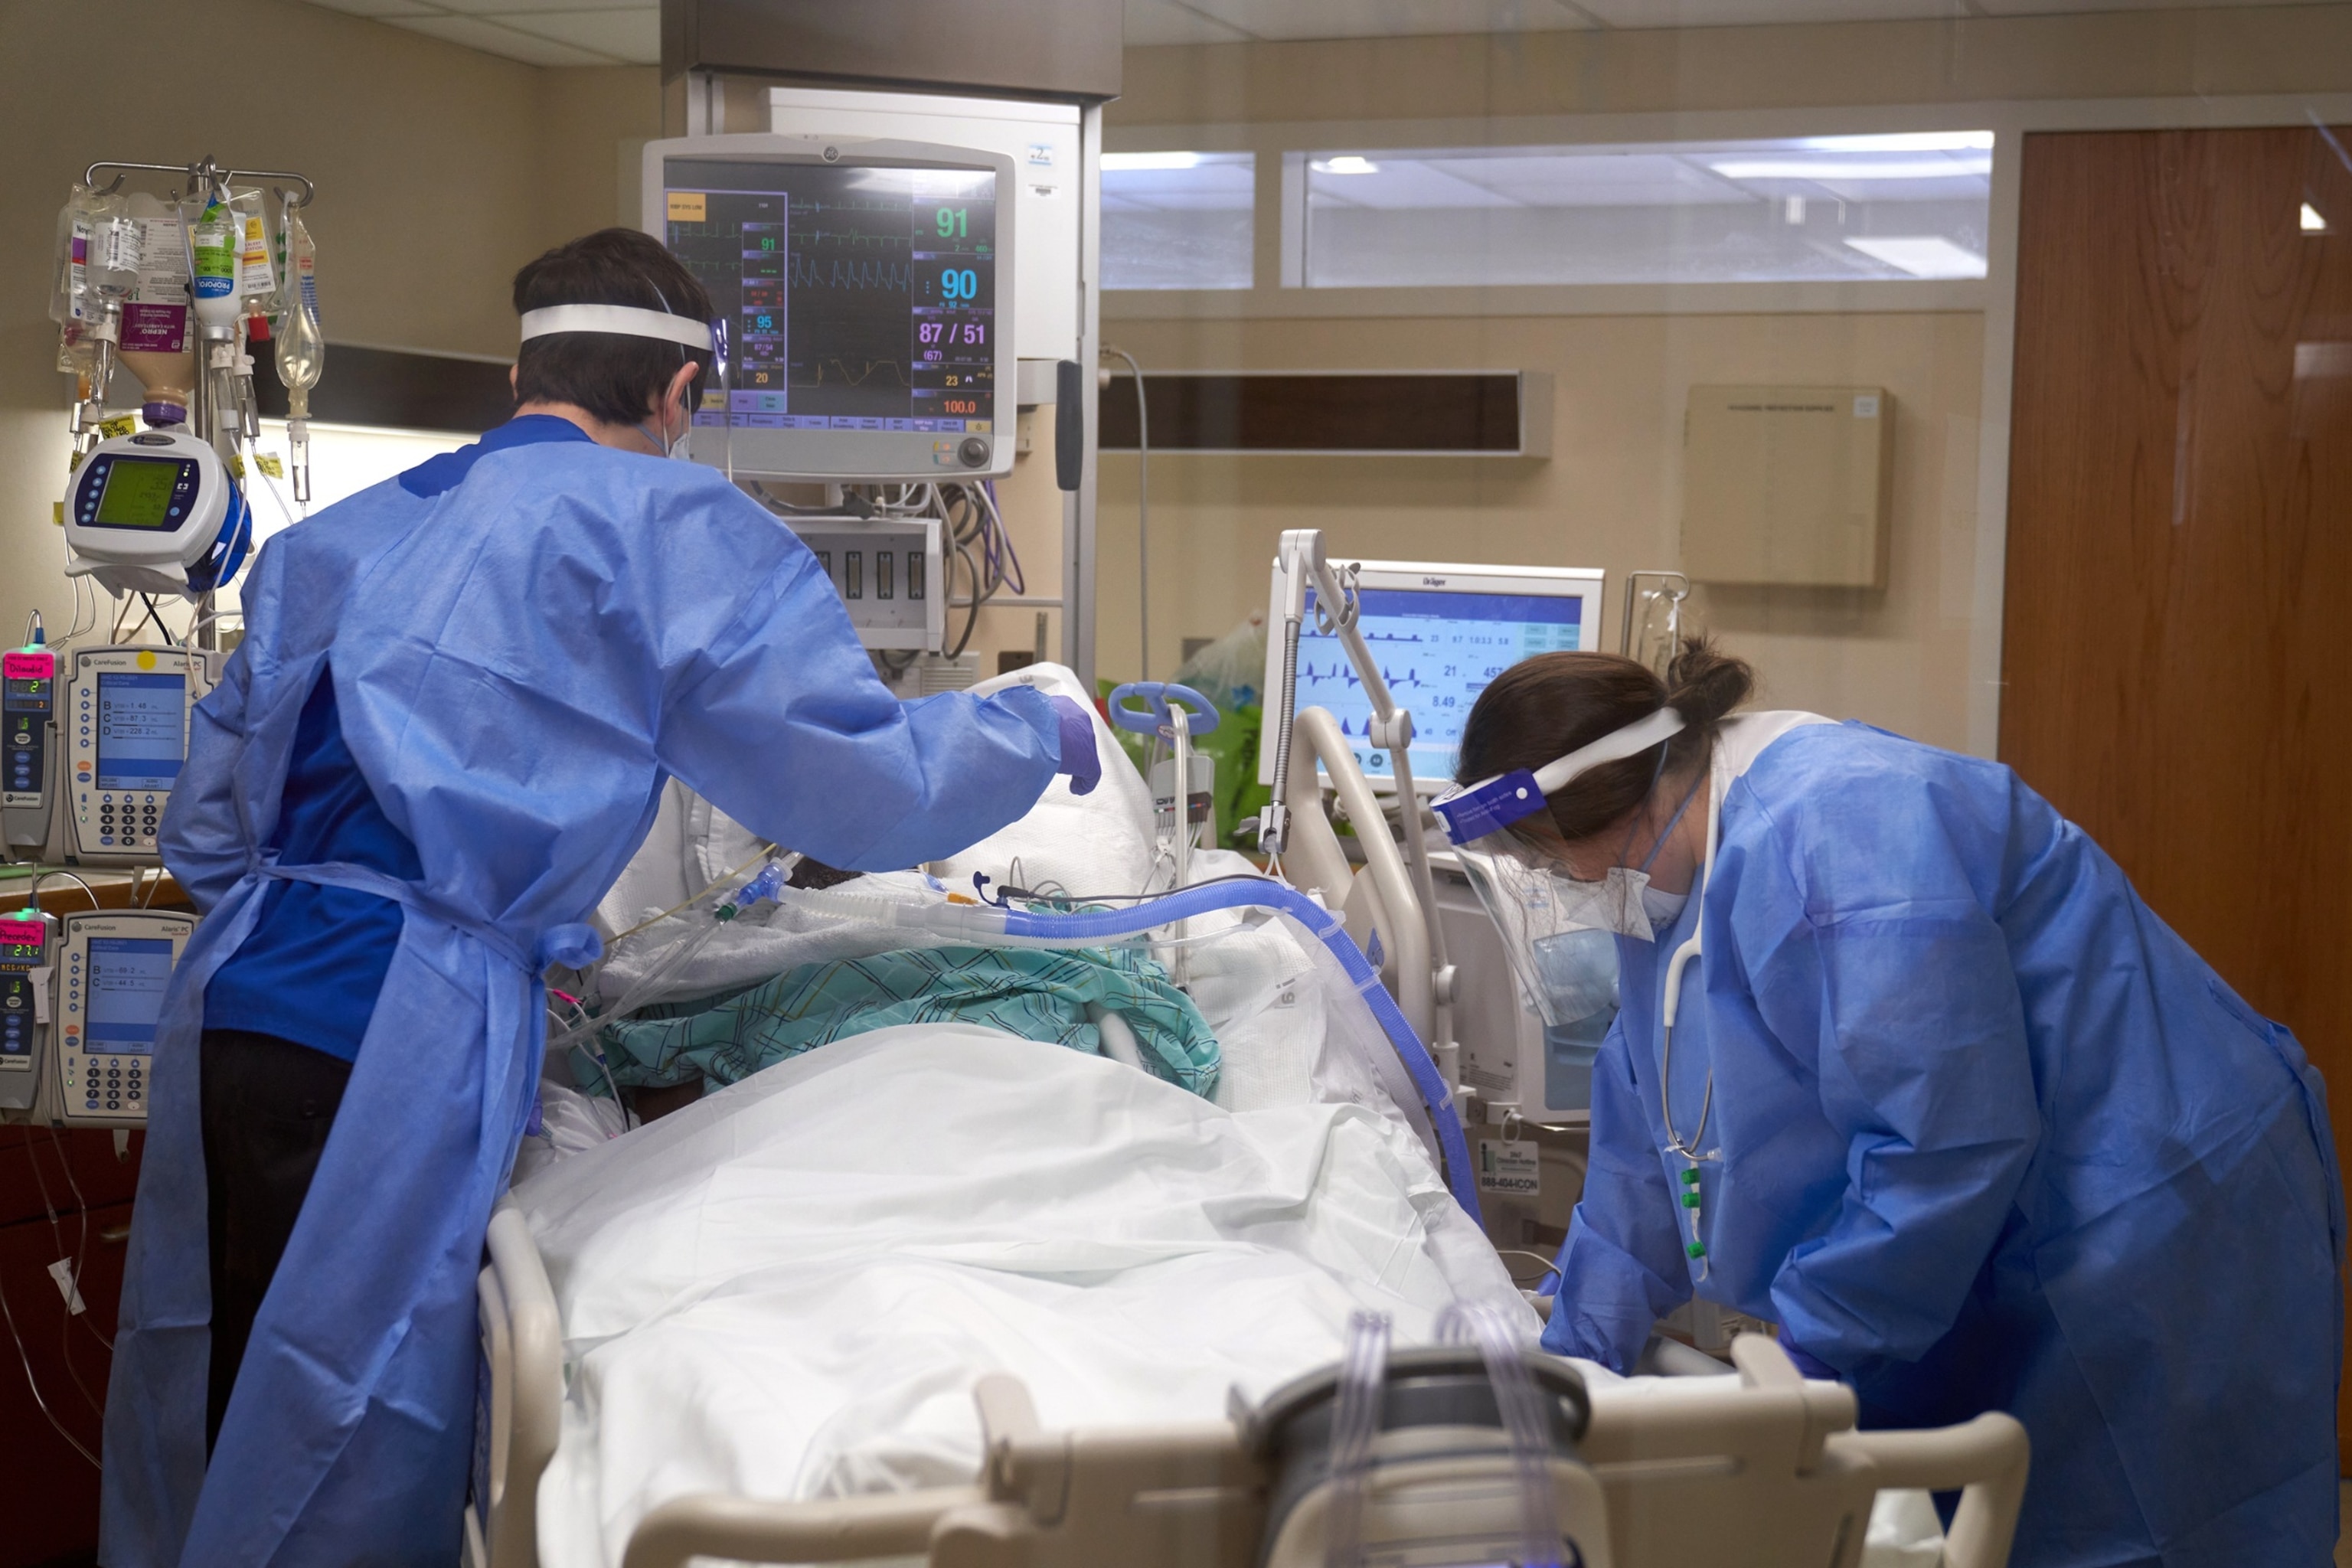 PHOTO: In this Jan. 31, 2022, file photo, healthcare workers treat a Covid-19 patient on the Intensive Care Unit (ICU) floor at Hartford Hospital in Hartford, Conn.